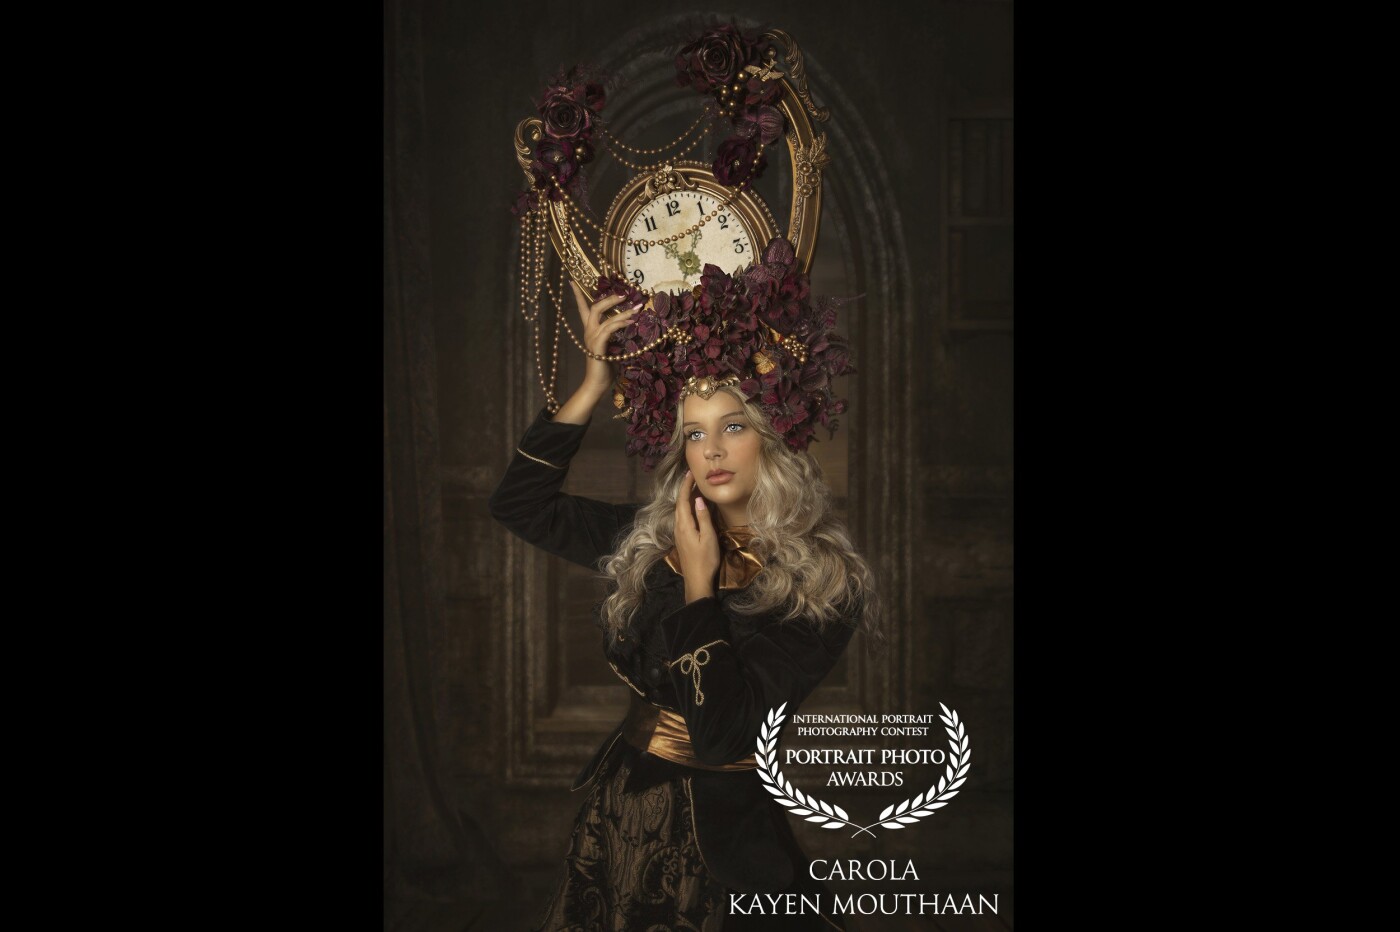 This Young model of 20 years old wears a handmade headpiece I added a clock in the picture with photoshop and made the picture in fine art style